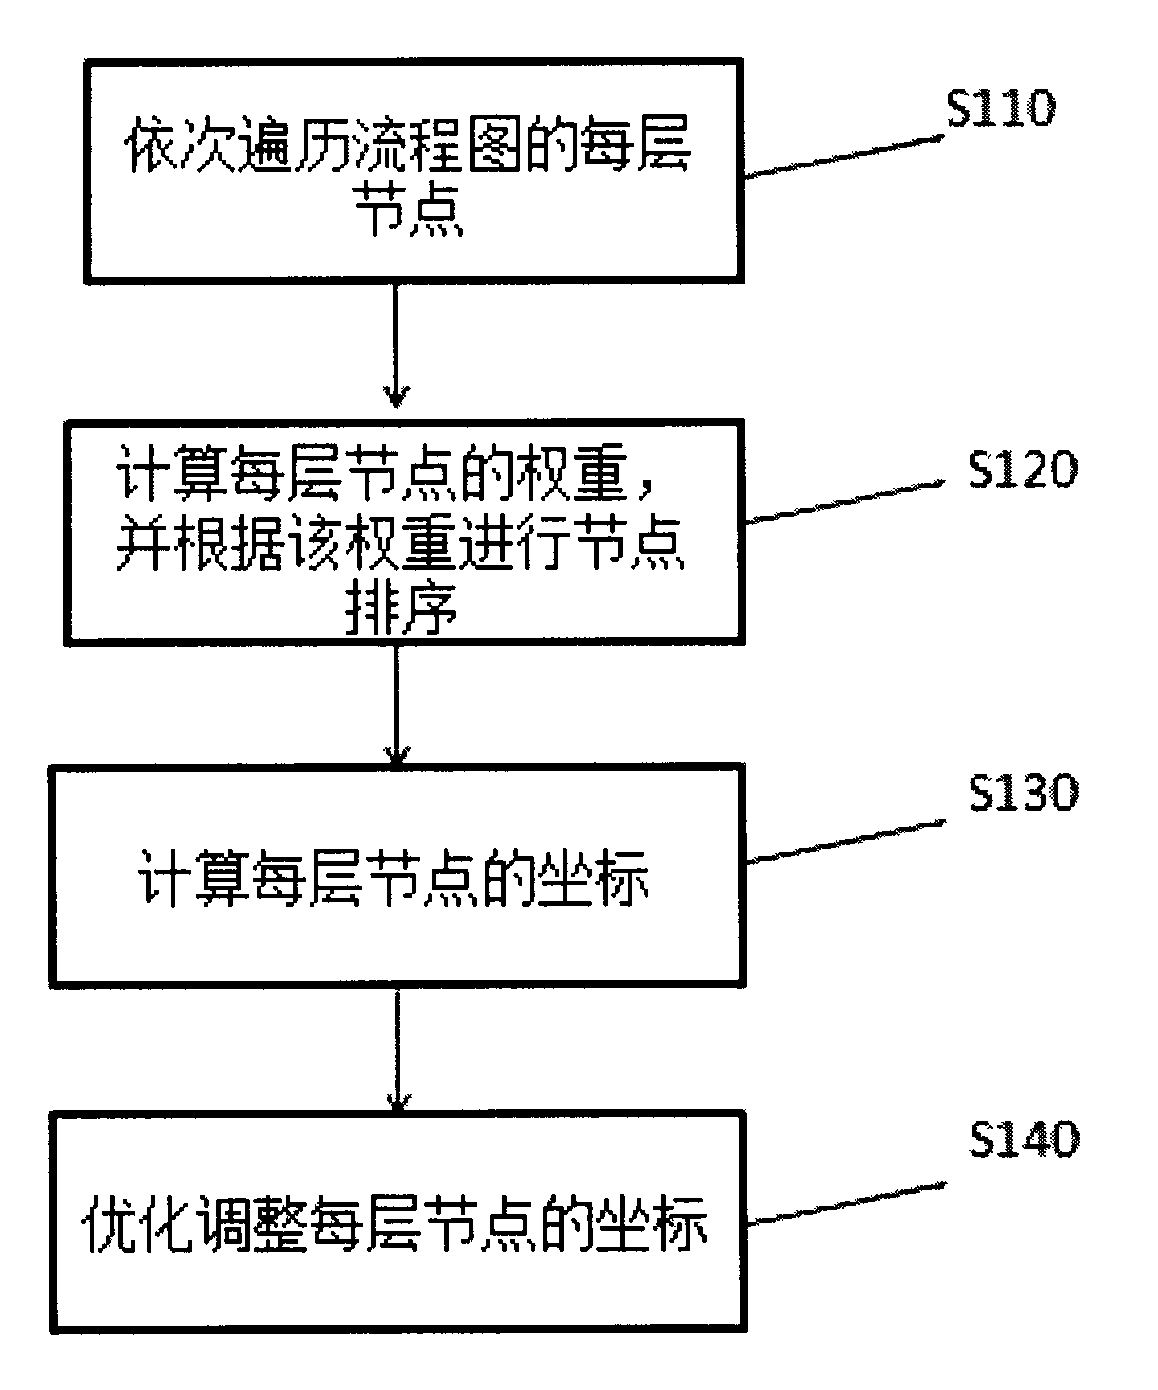 Method and device for analyzing layout of flow chart